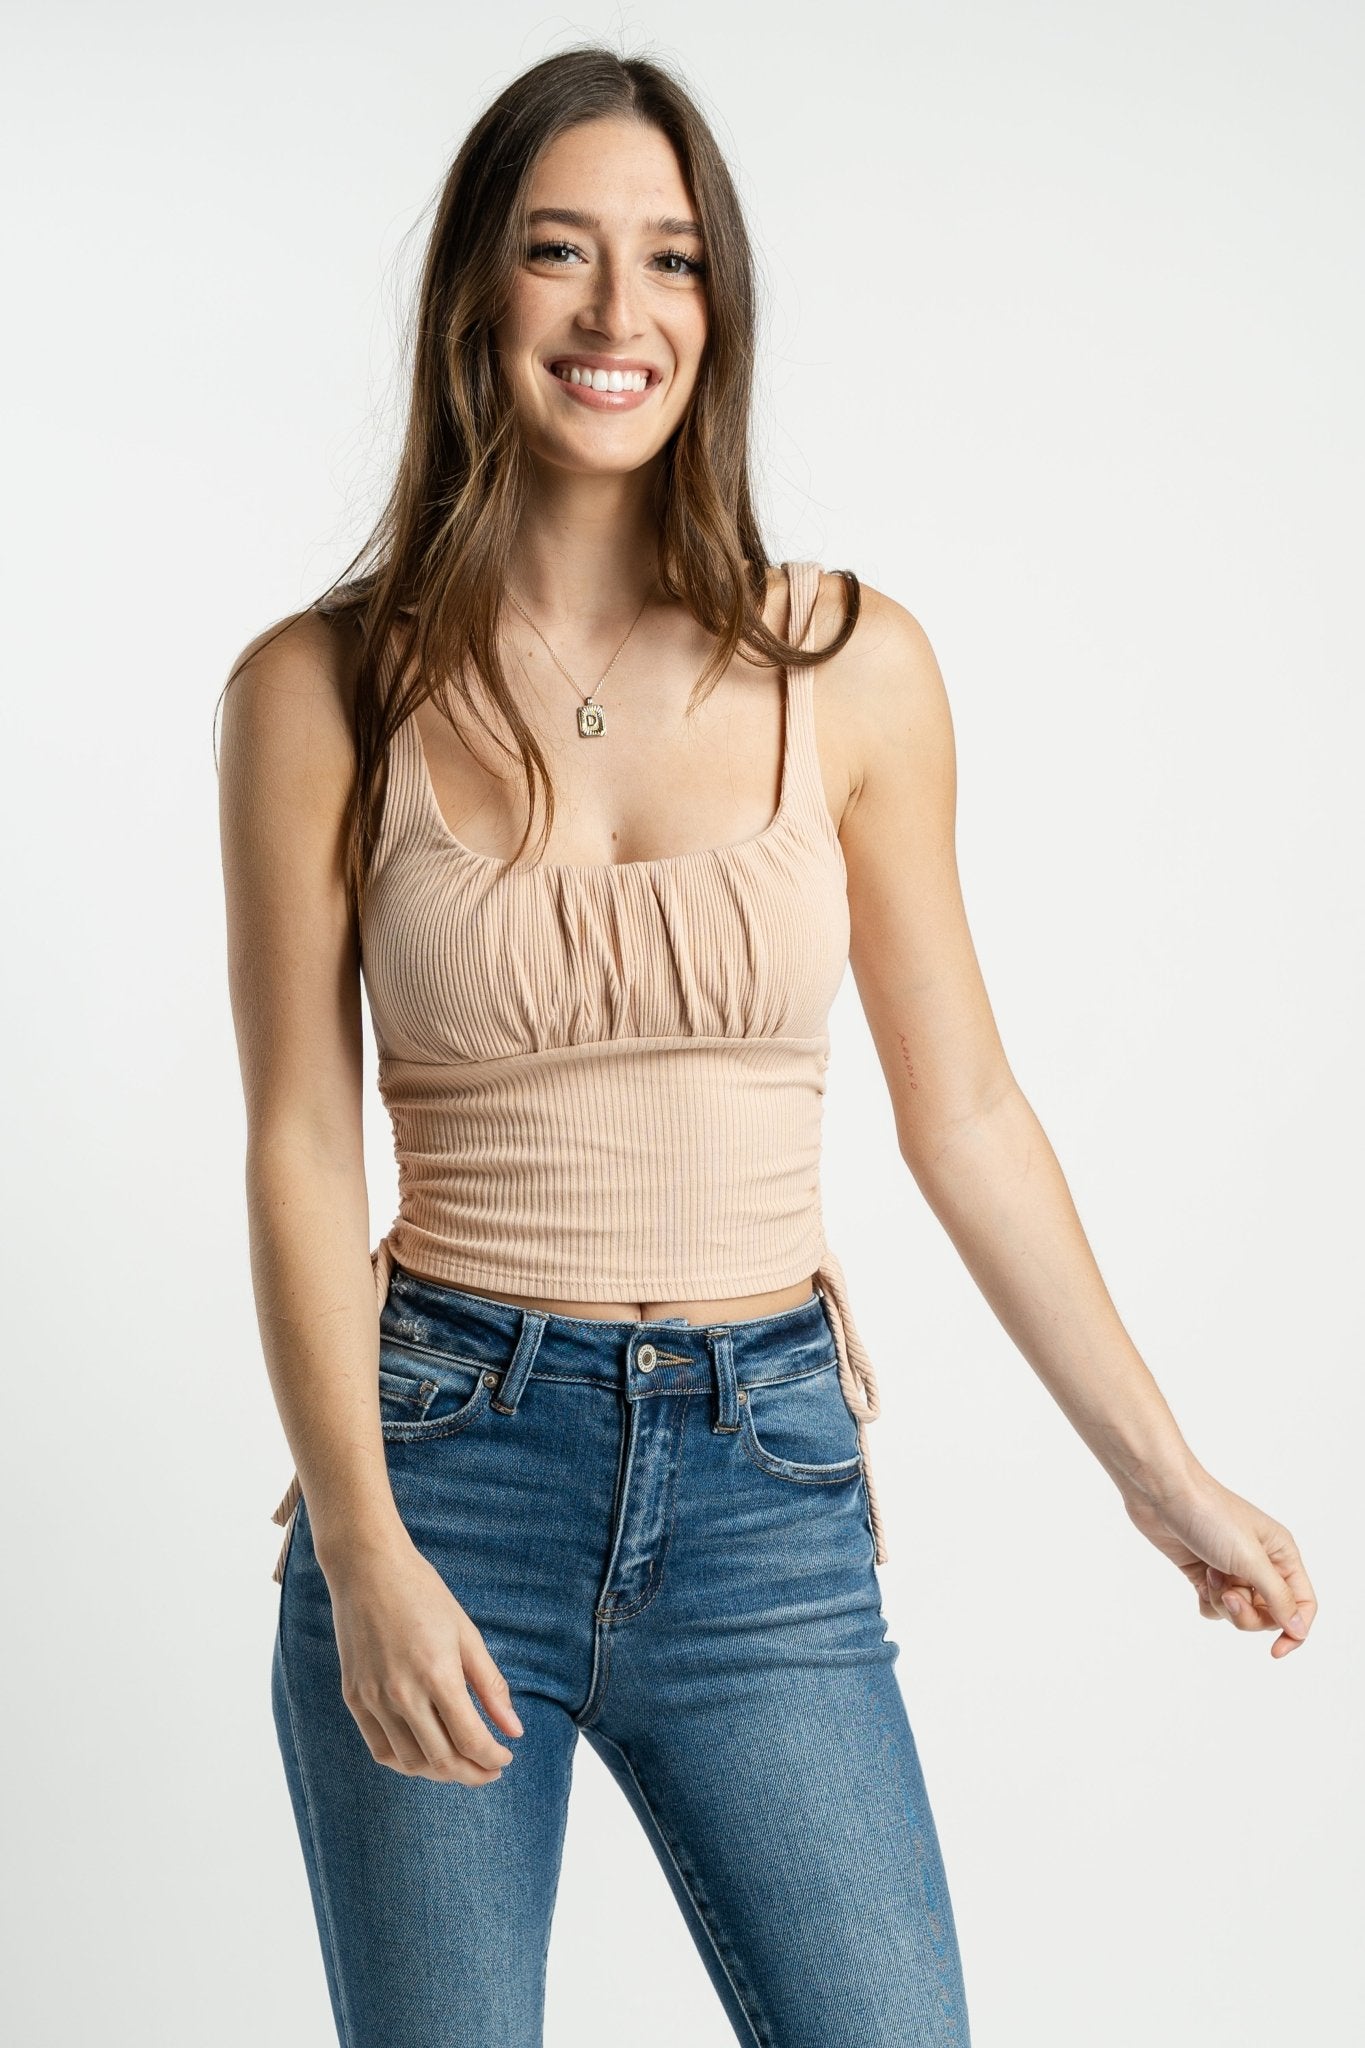 Ribbed string side tank top mauve - Affordable tank top - Boutique Tank Tops at Lush Fashion Lounge Boutique in Oklahoma City